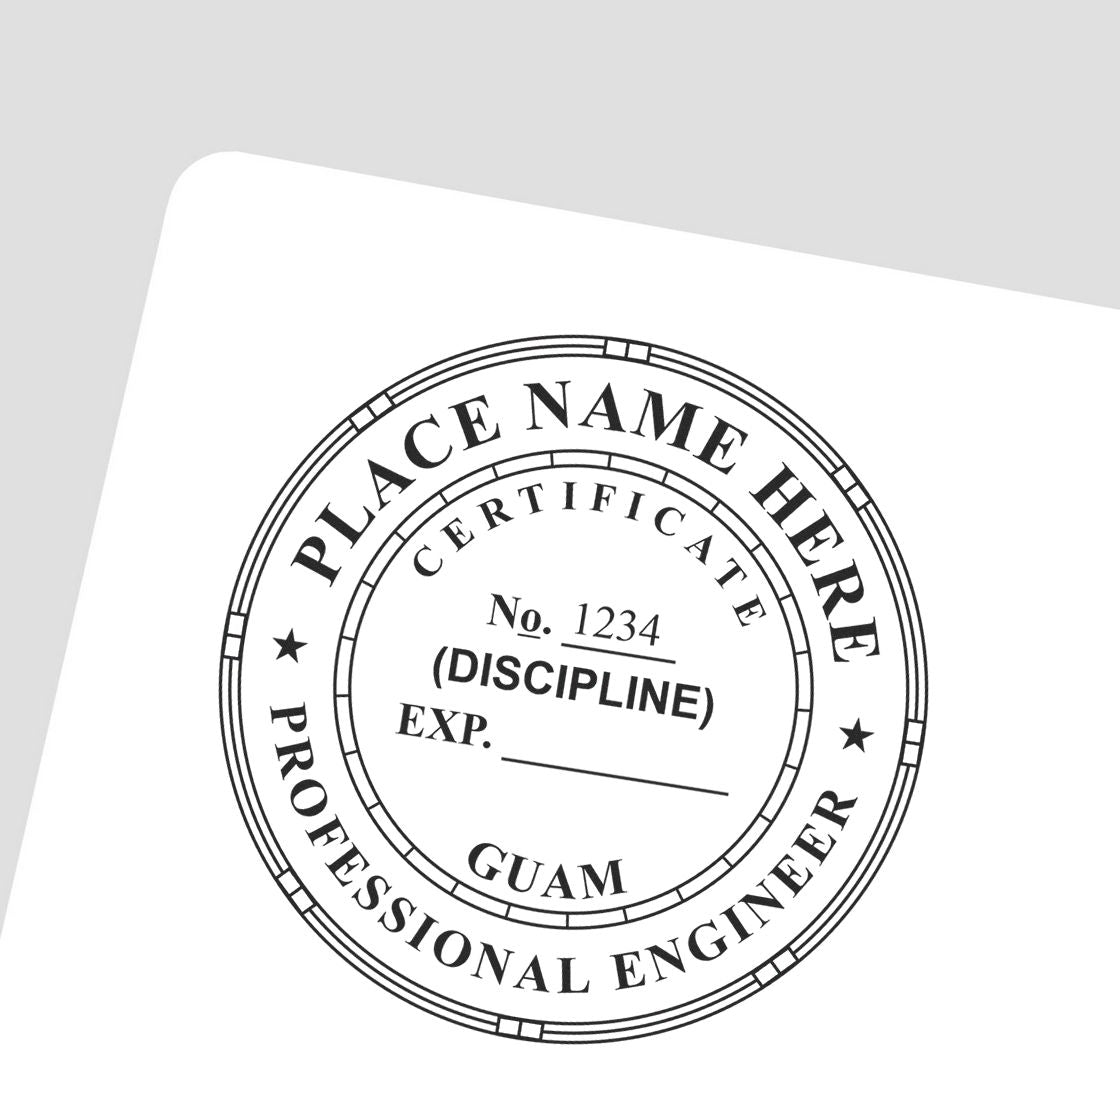 A lifestyle photo showing a stamped image of the Digital Guam PE Stamp and Electronic Seal for Guam Engineer on a piece of paper